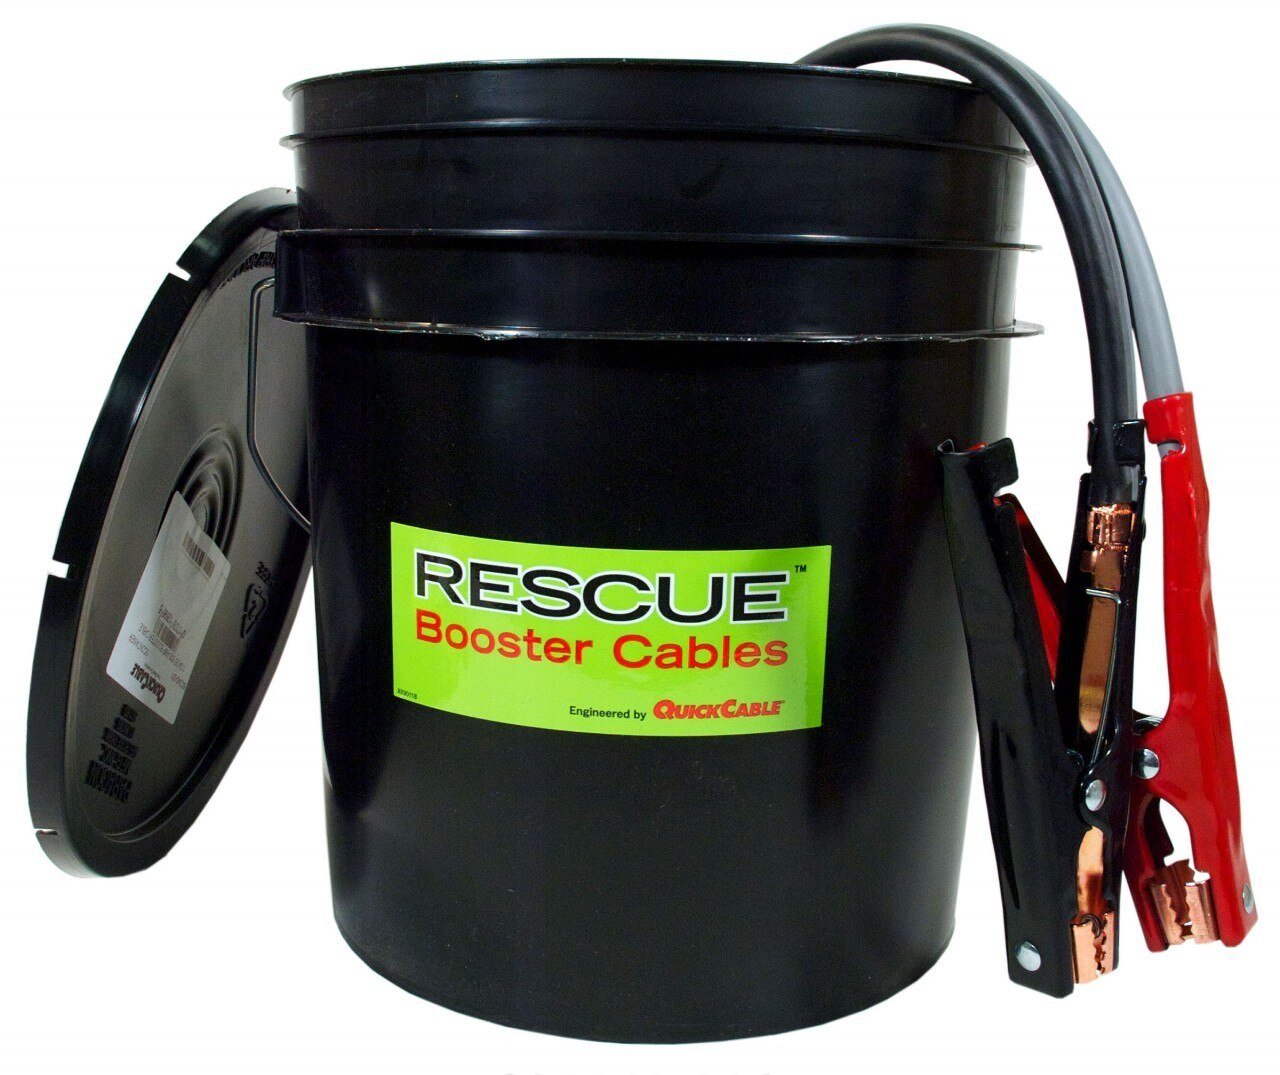 Quick Cable RESCUE Heavy Duty Pail Contained Booster Cables Automotive Tools - Cleanflow